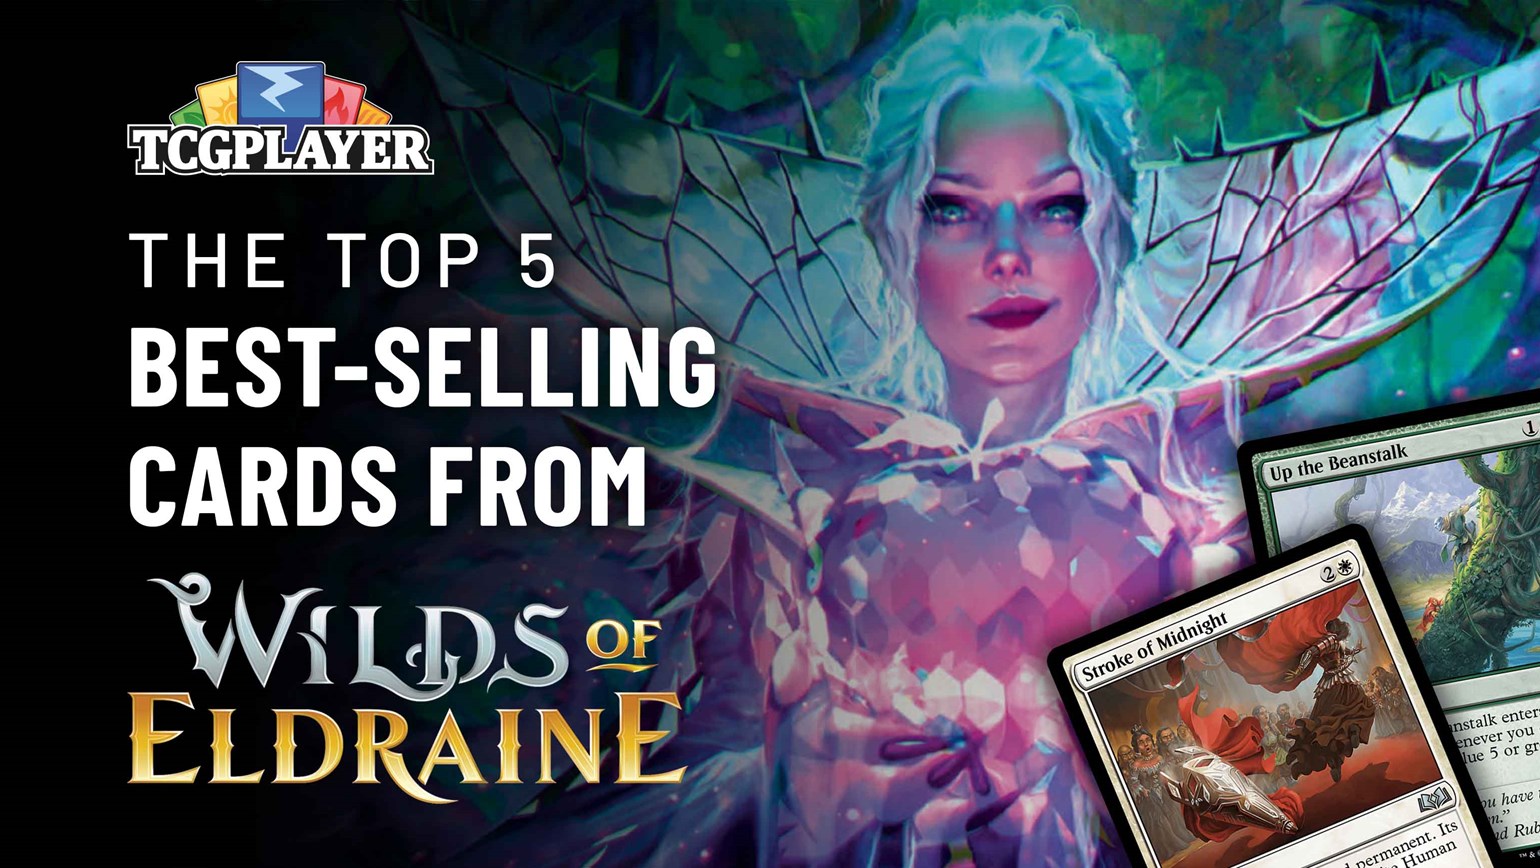 The Top 5 Best-Selling Cards From Wilds of Eldraine